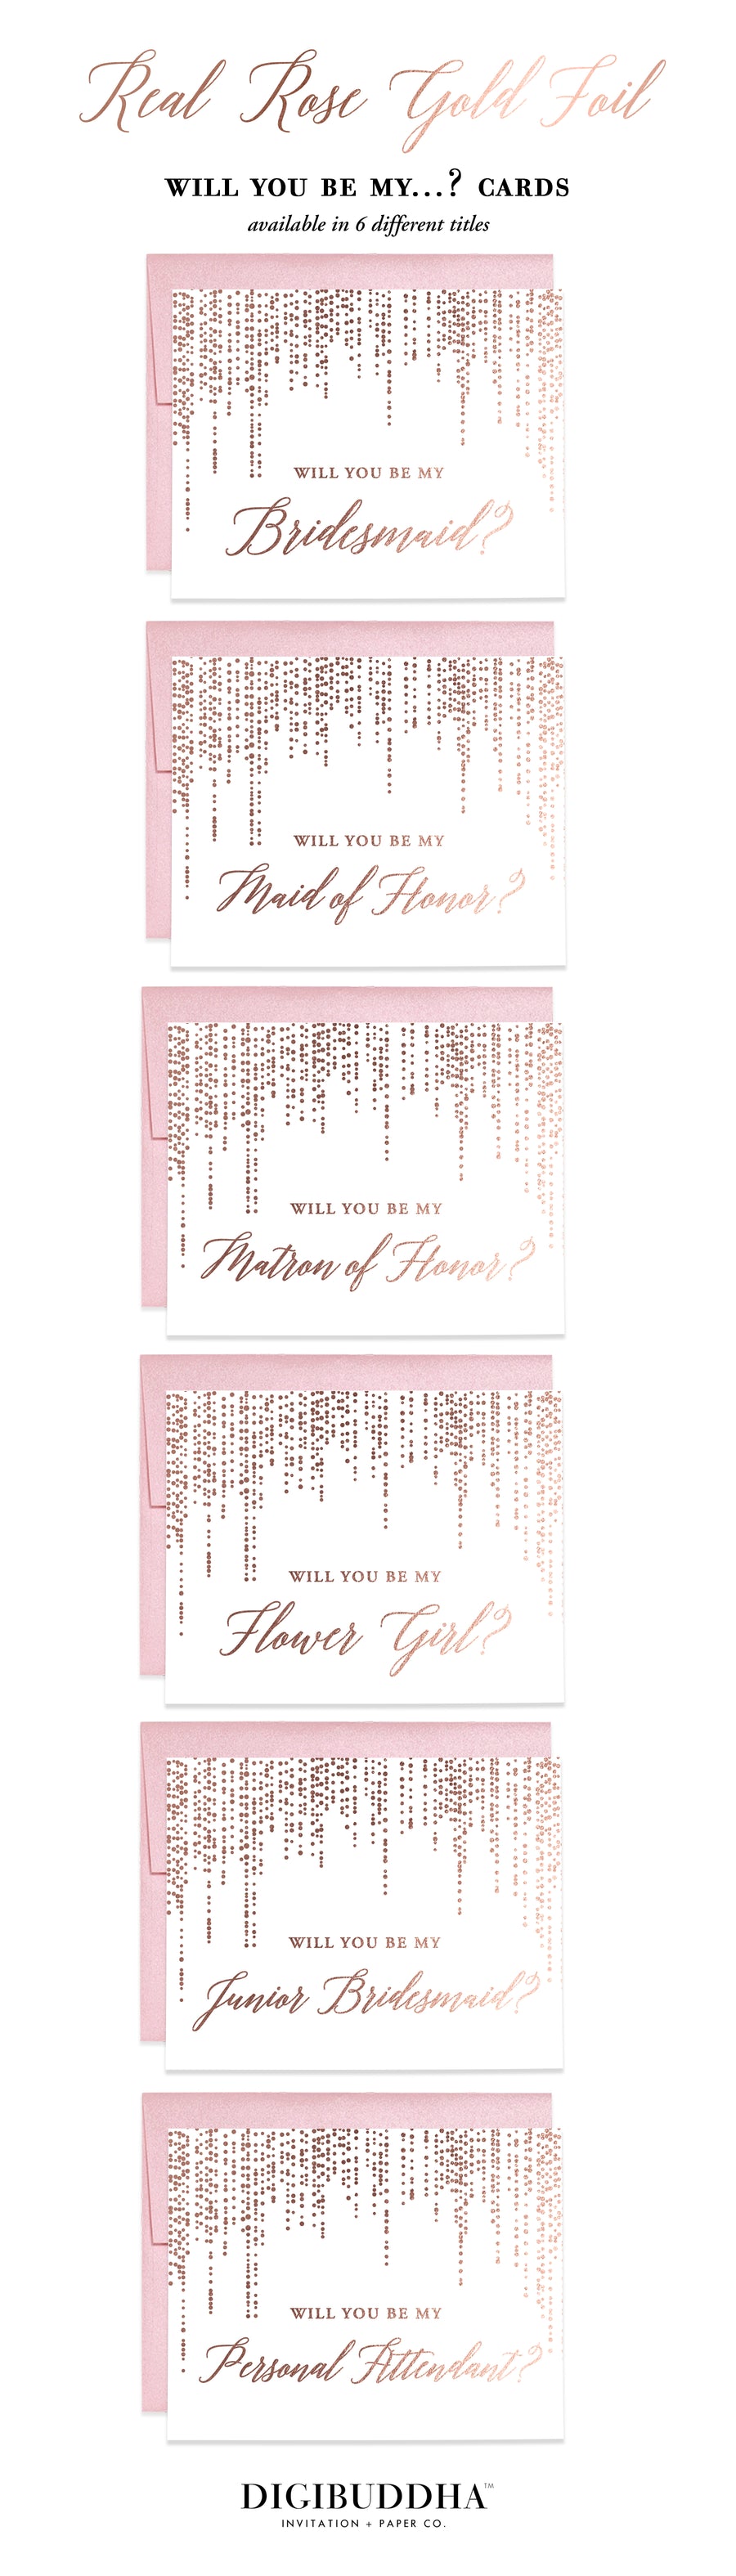 Will You Be My Bridesmaid? Rose Gold Foil Proposal Card